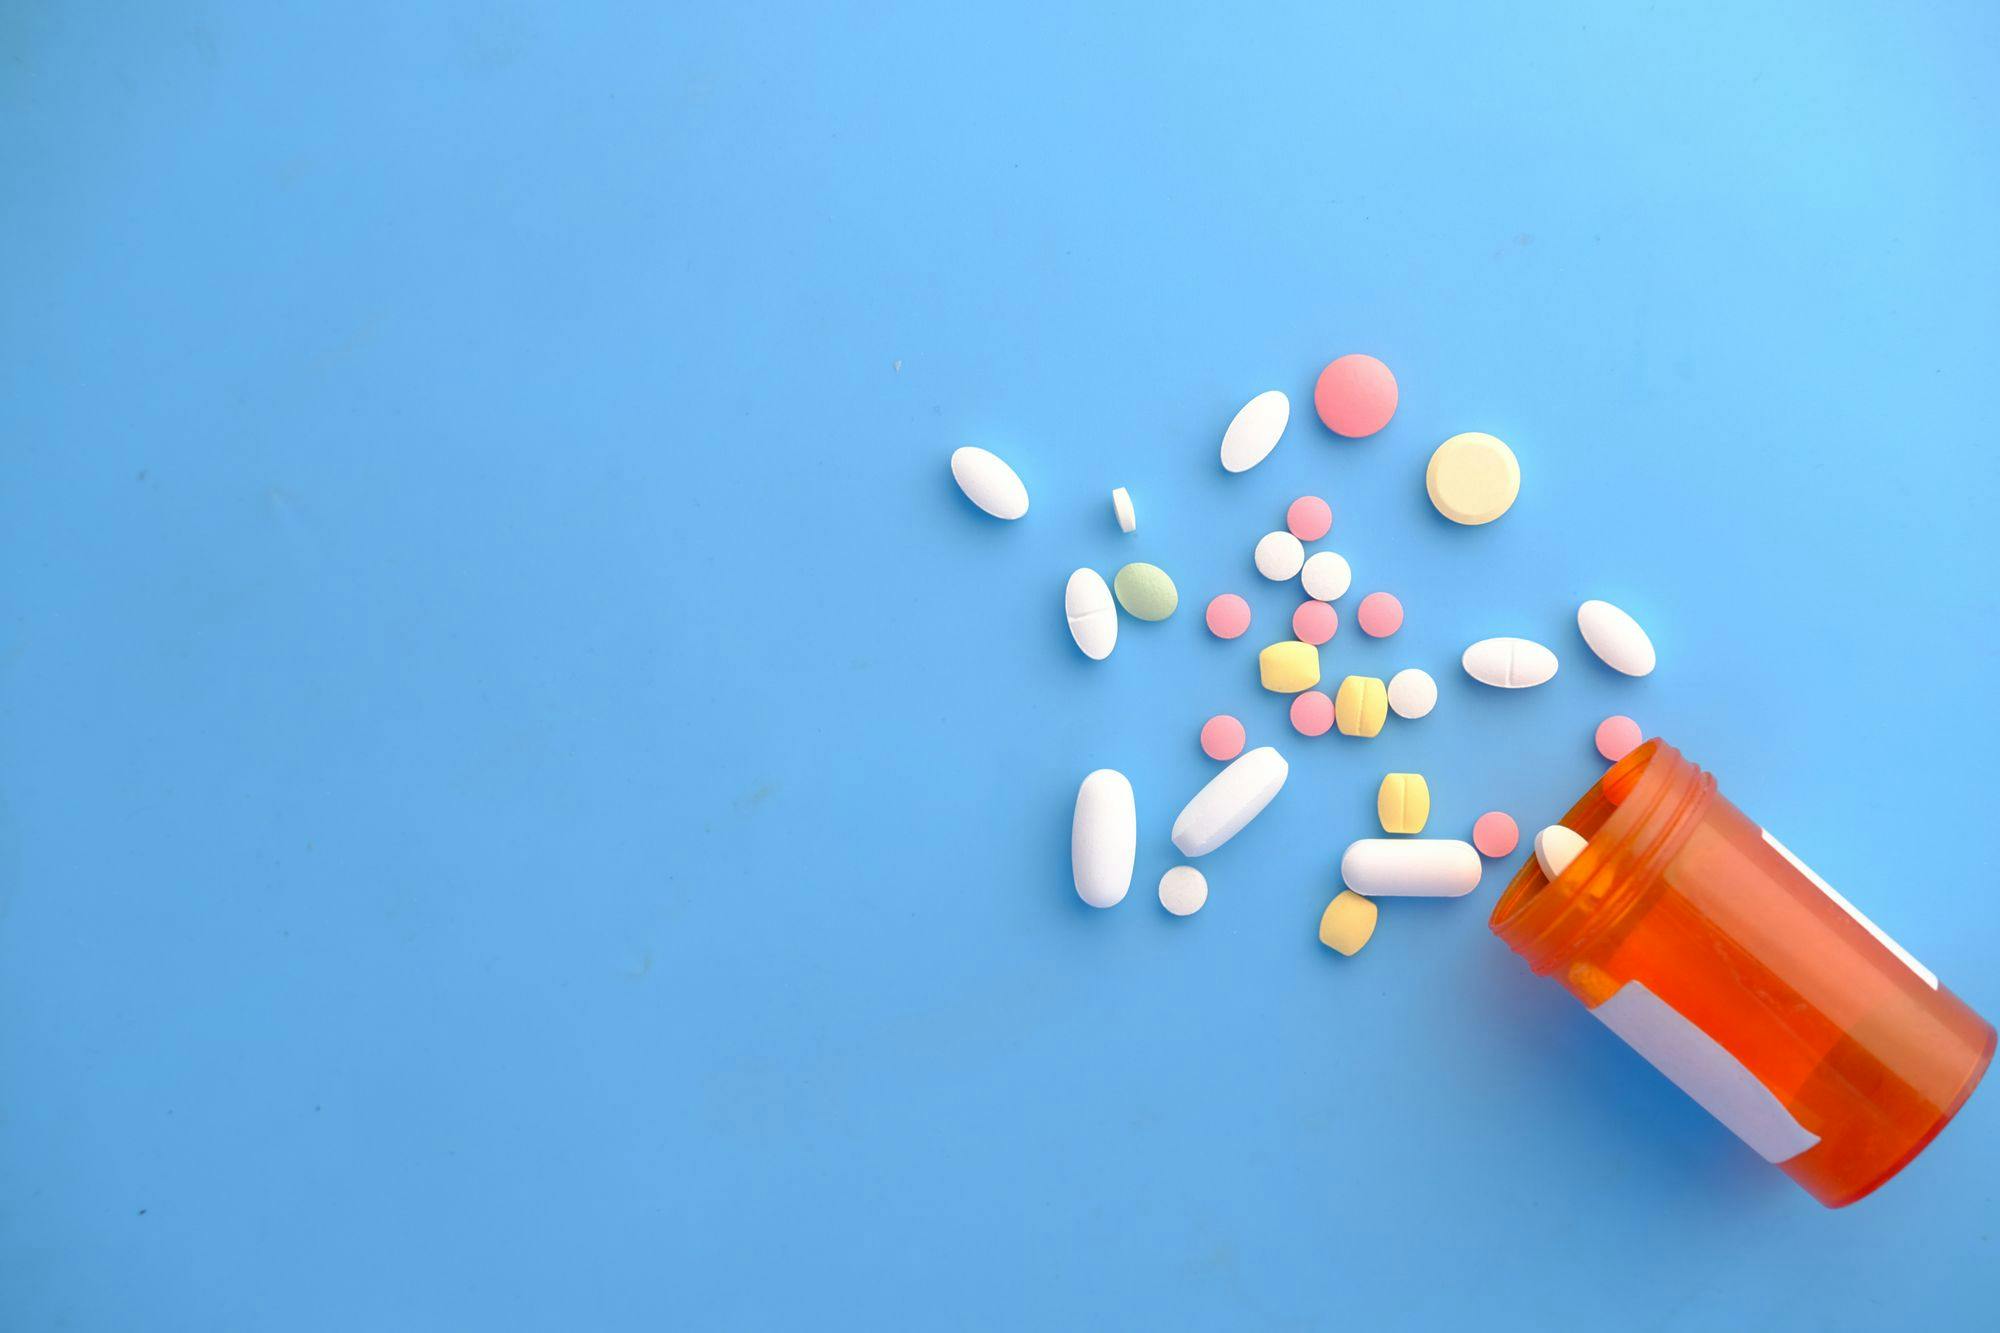 Orange prescription bottle lying on its side with various pills of different sizes and colors spilling out onto a light blue background.